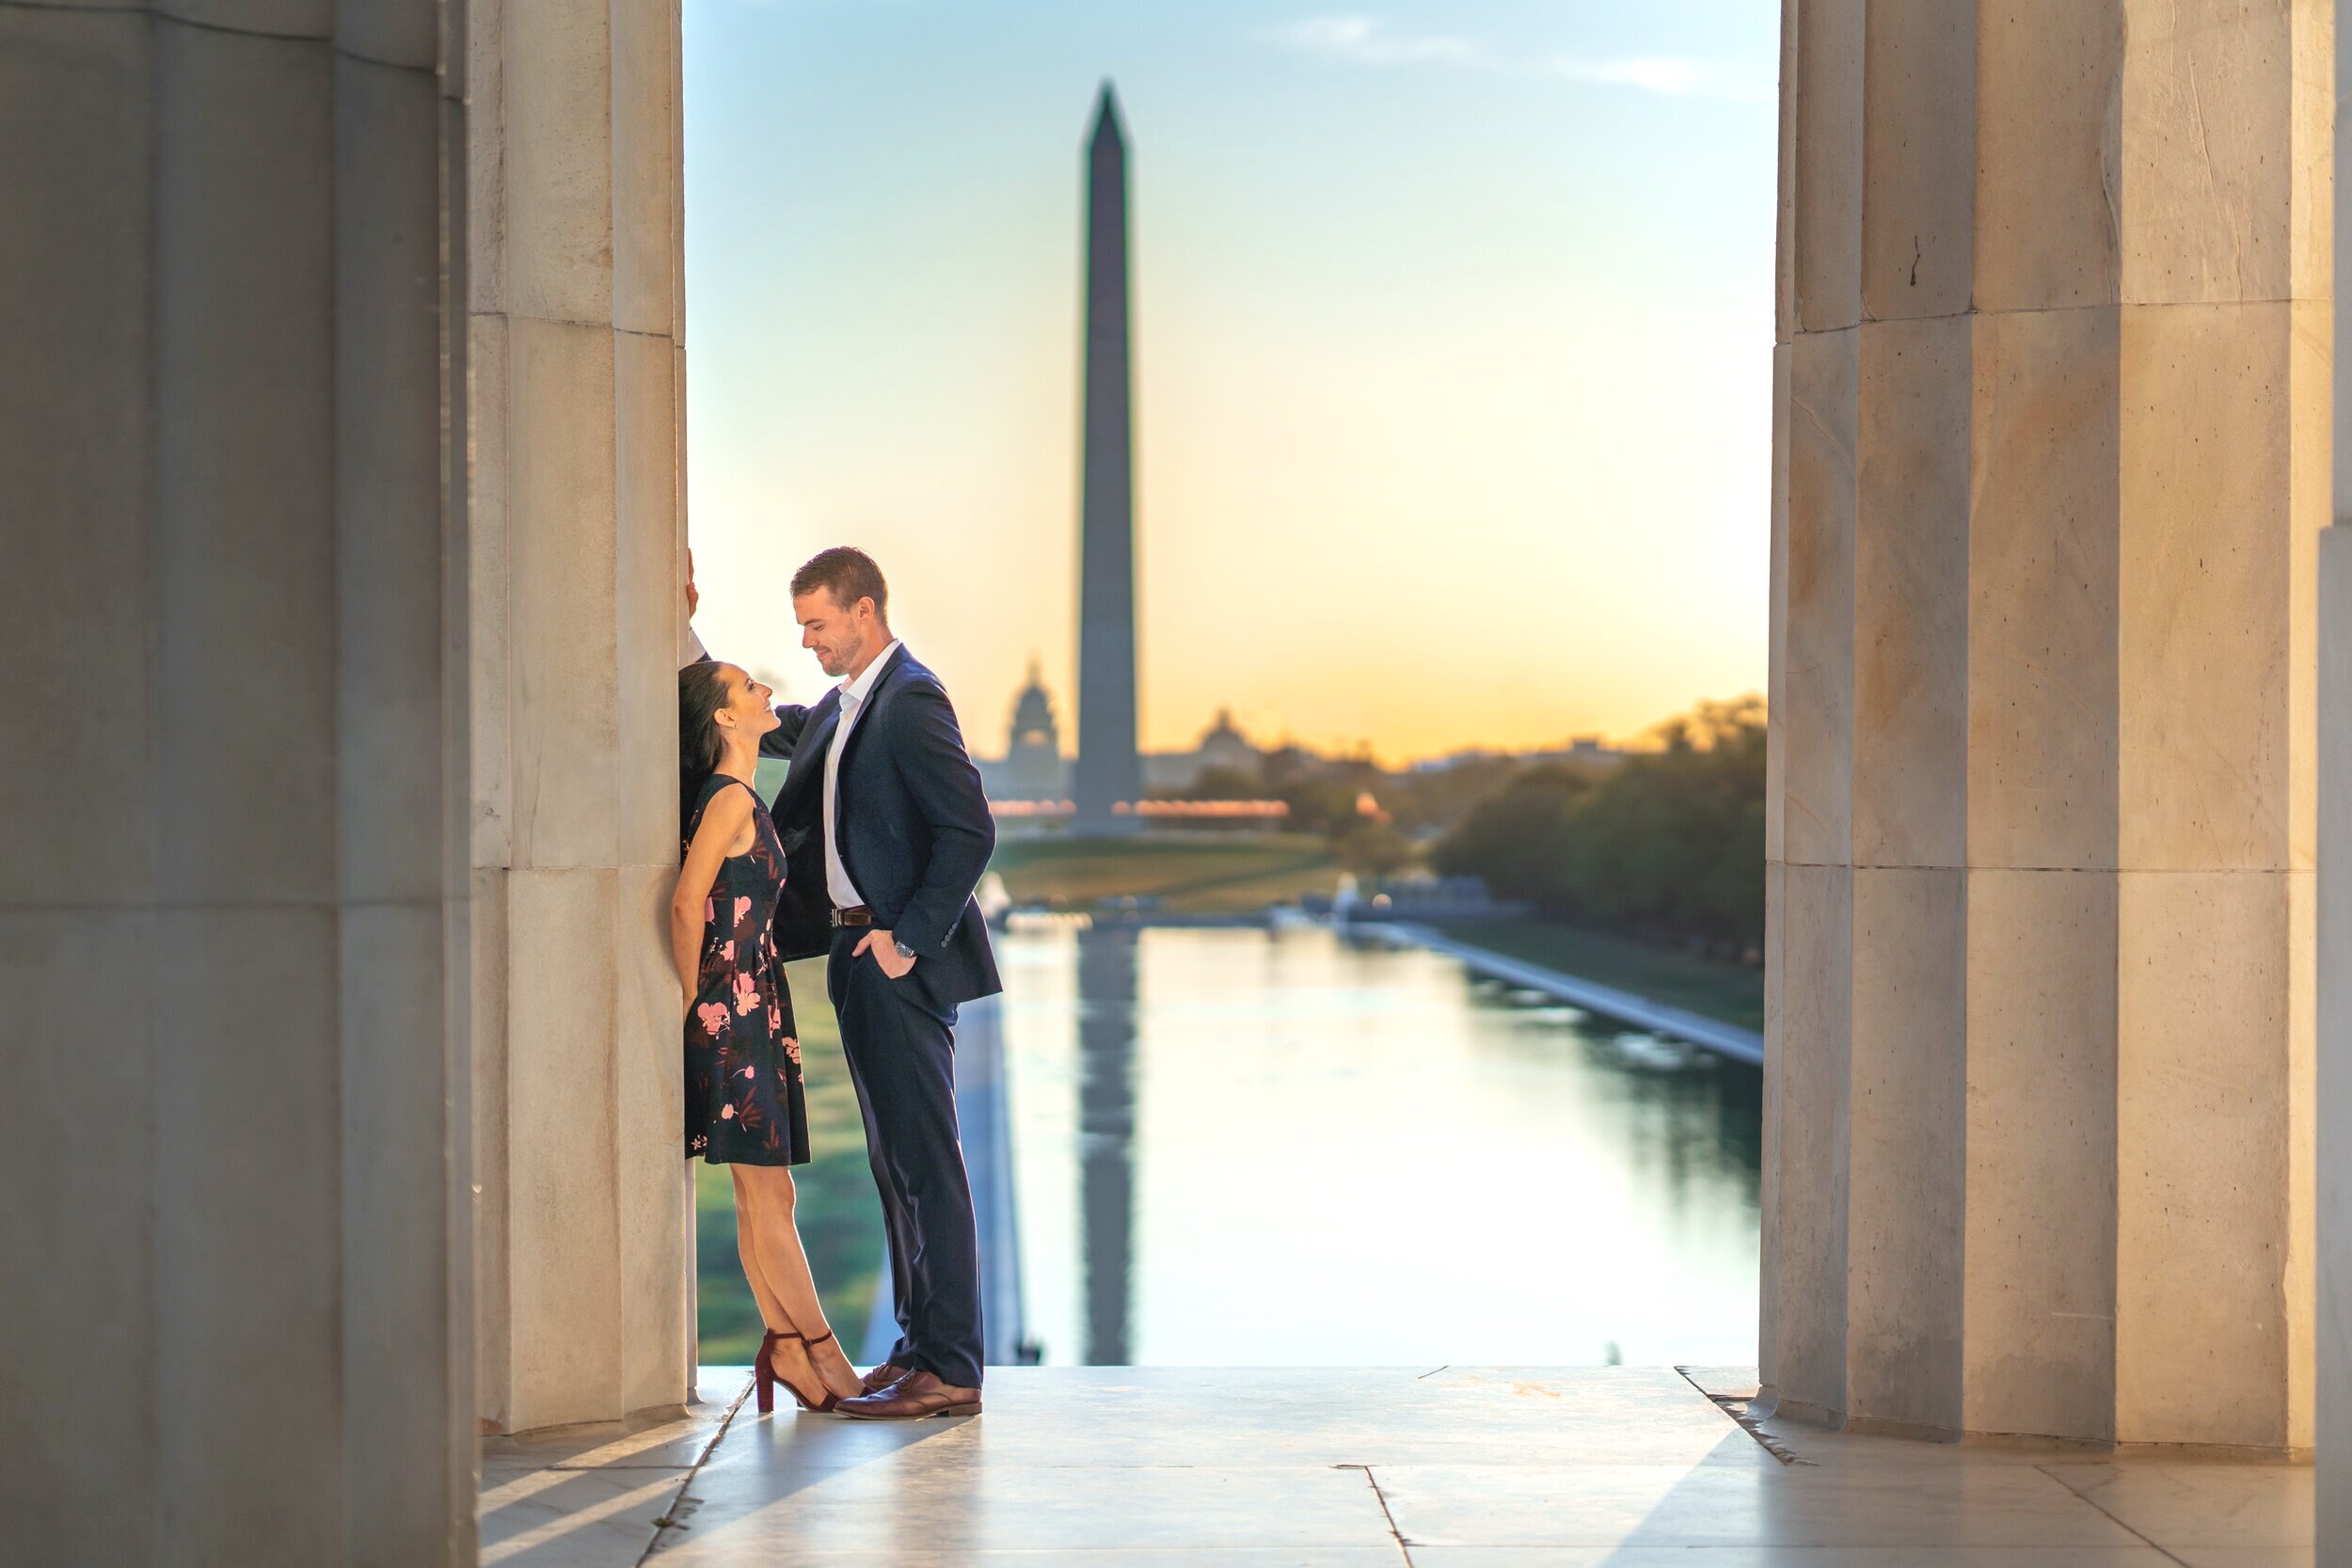 Sunrise engagement photo at the lincoln memorial overlooking the national monument